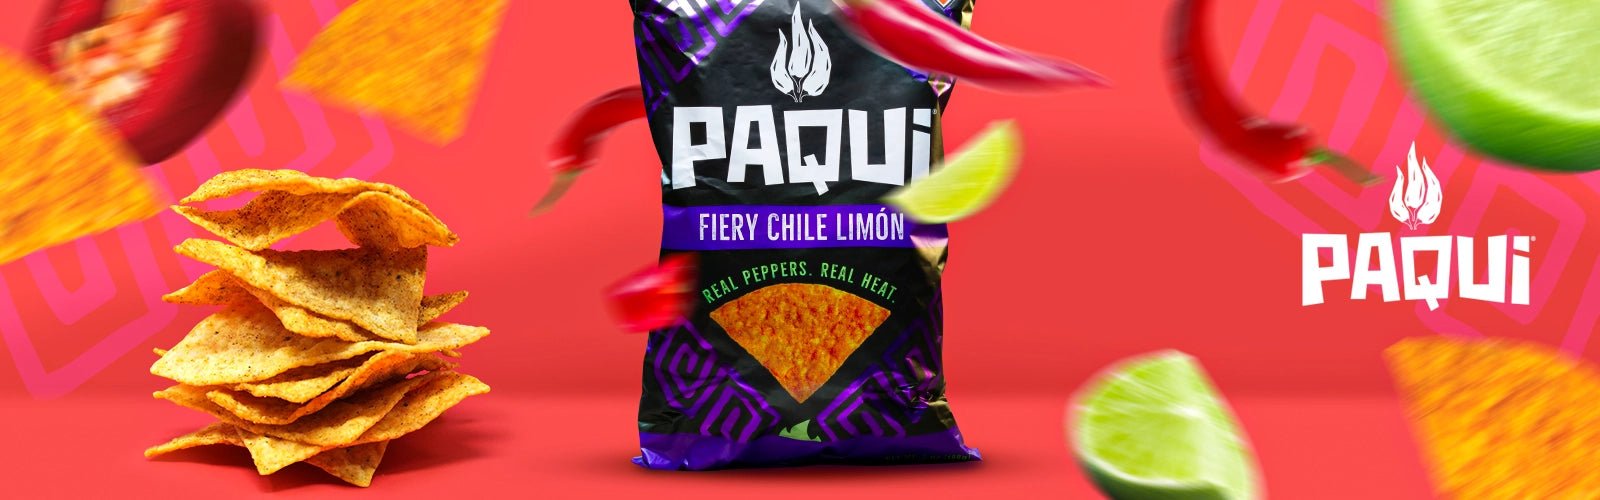 Paqui collection banner